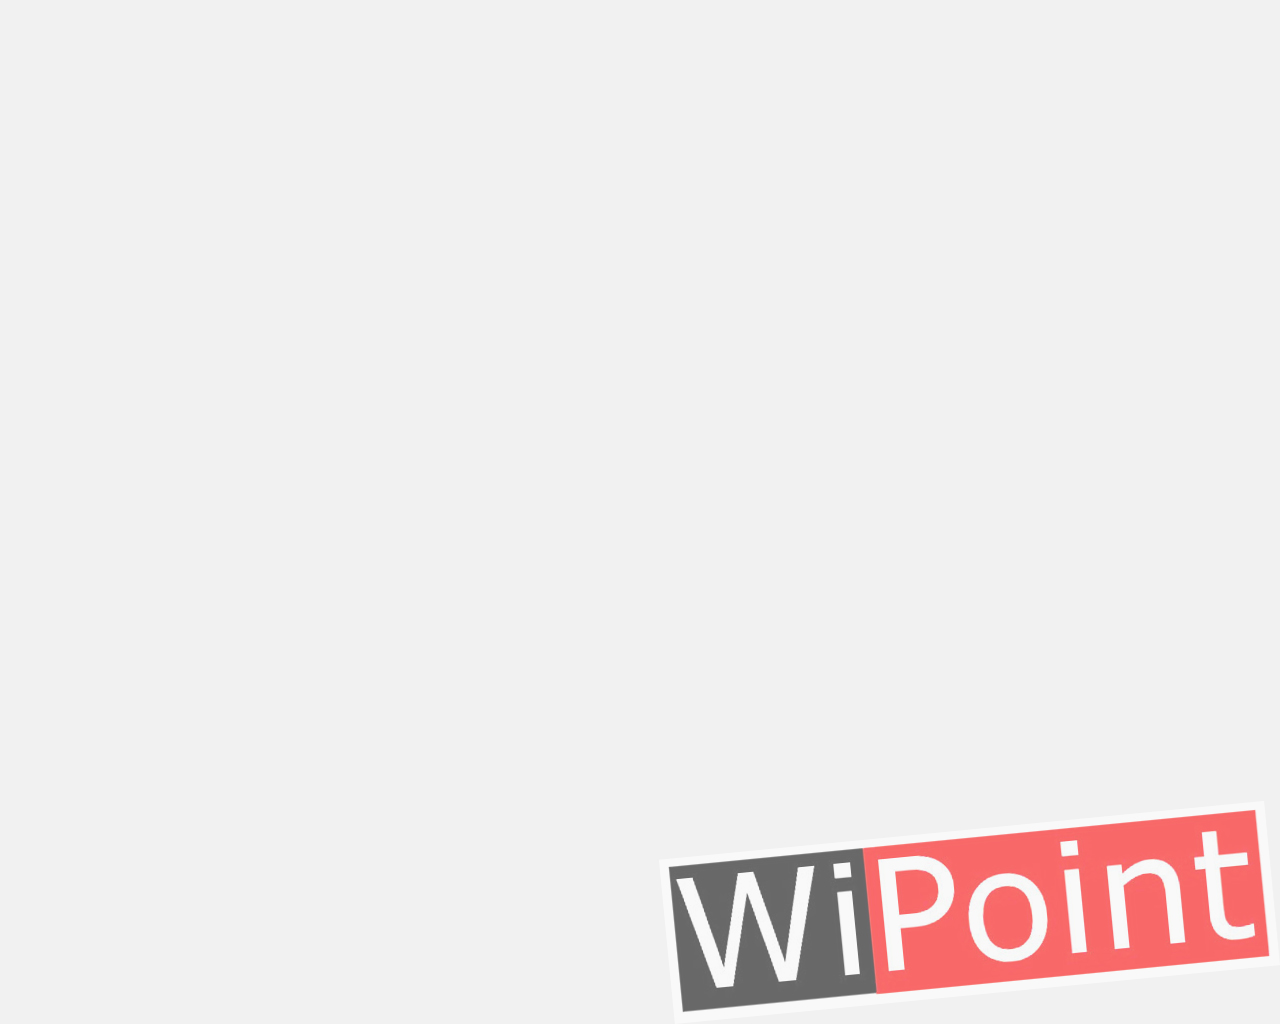 WiPoint